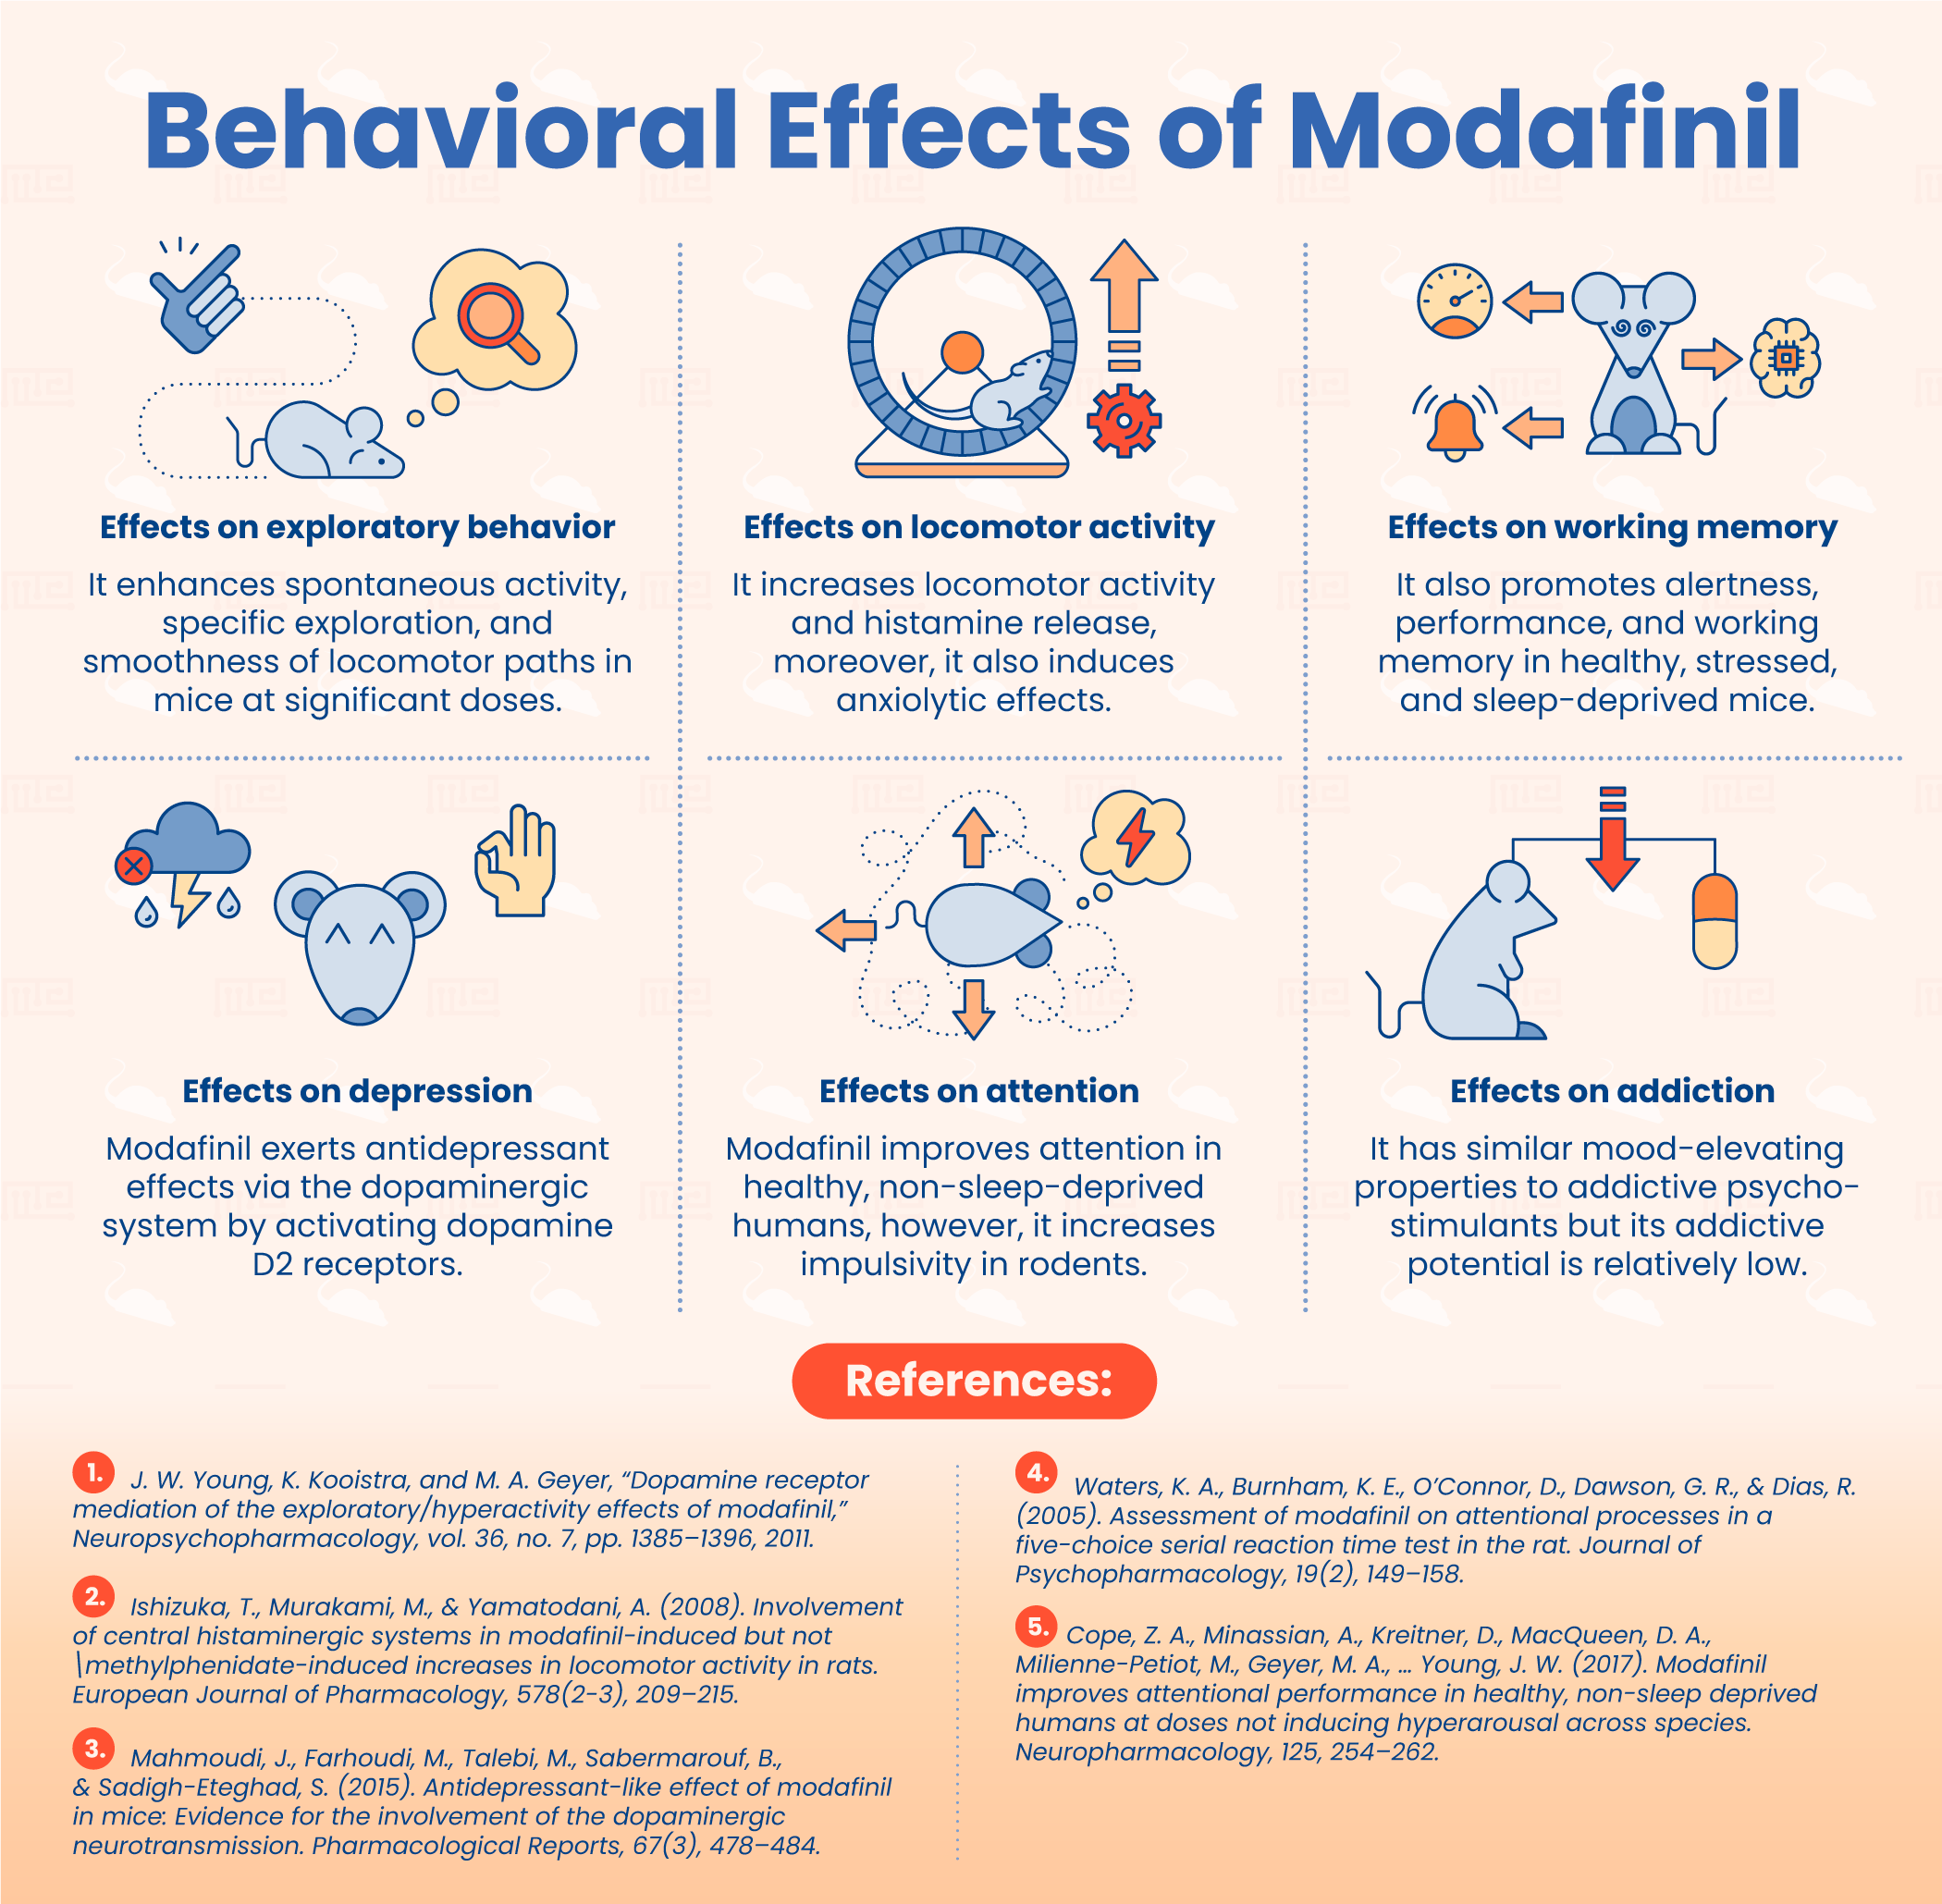 Modafinil Vs Adderall: Which Is More Effective For Enhancing Focus?